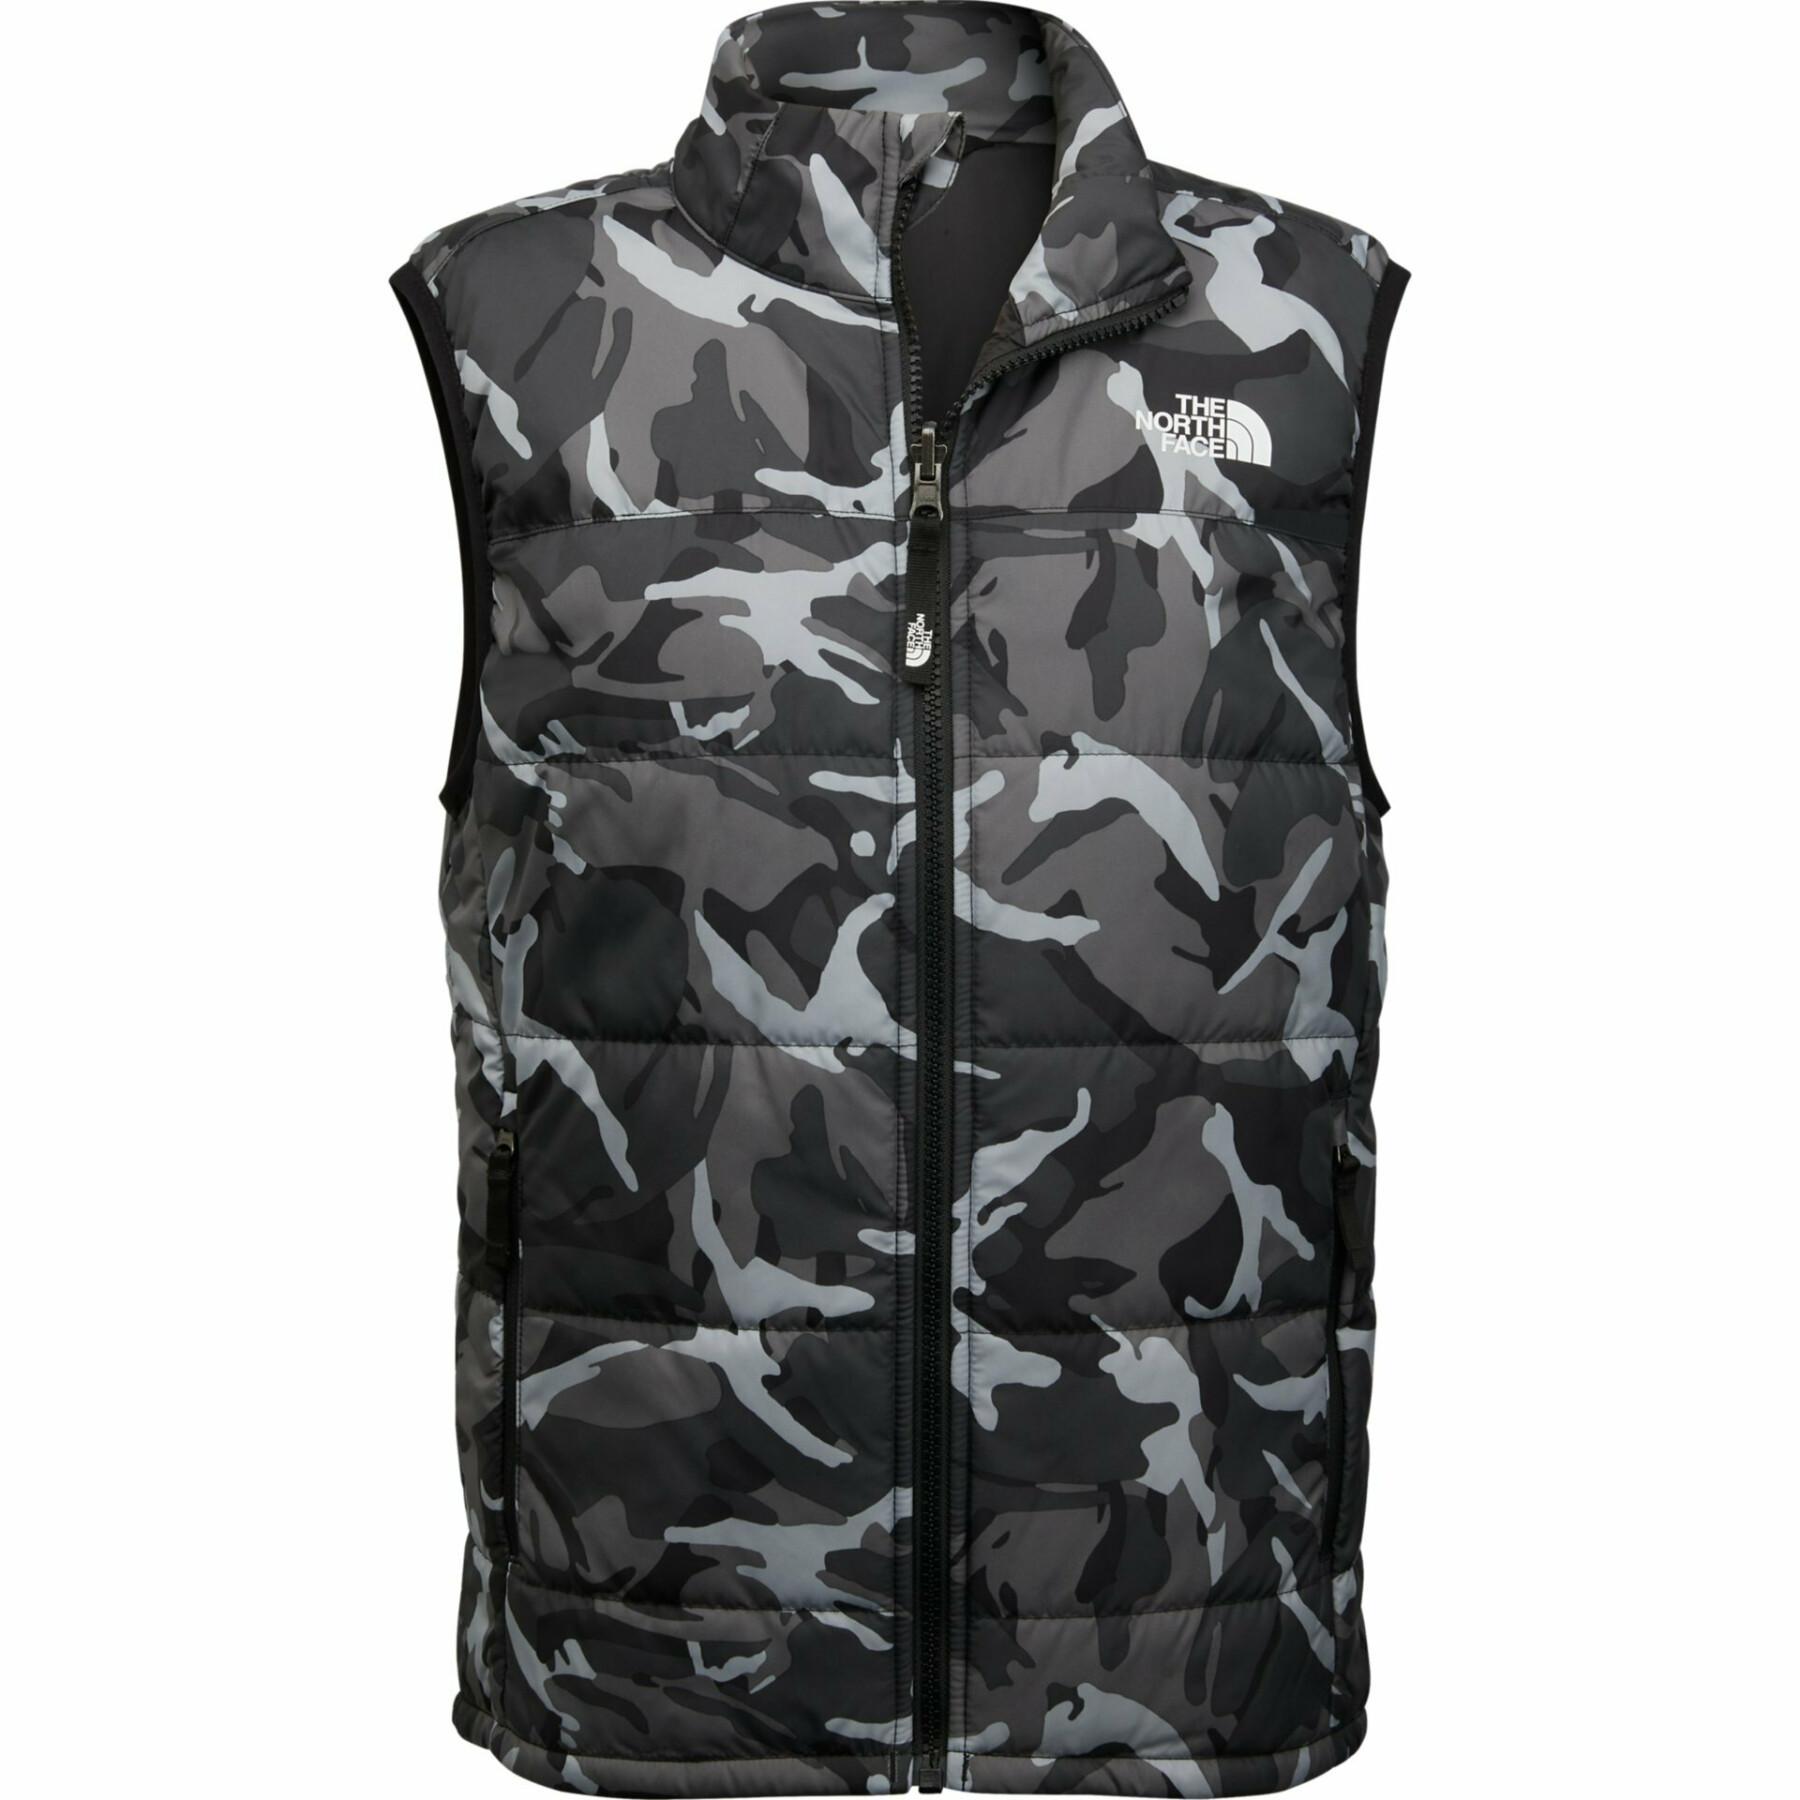 Kinderjacke The North Face Printed Reactor Insulated